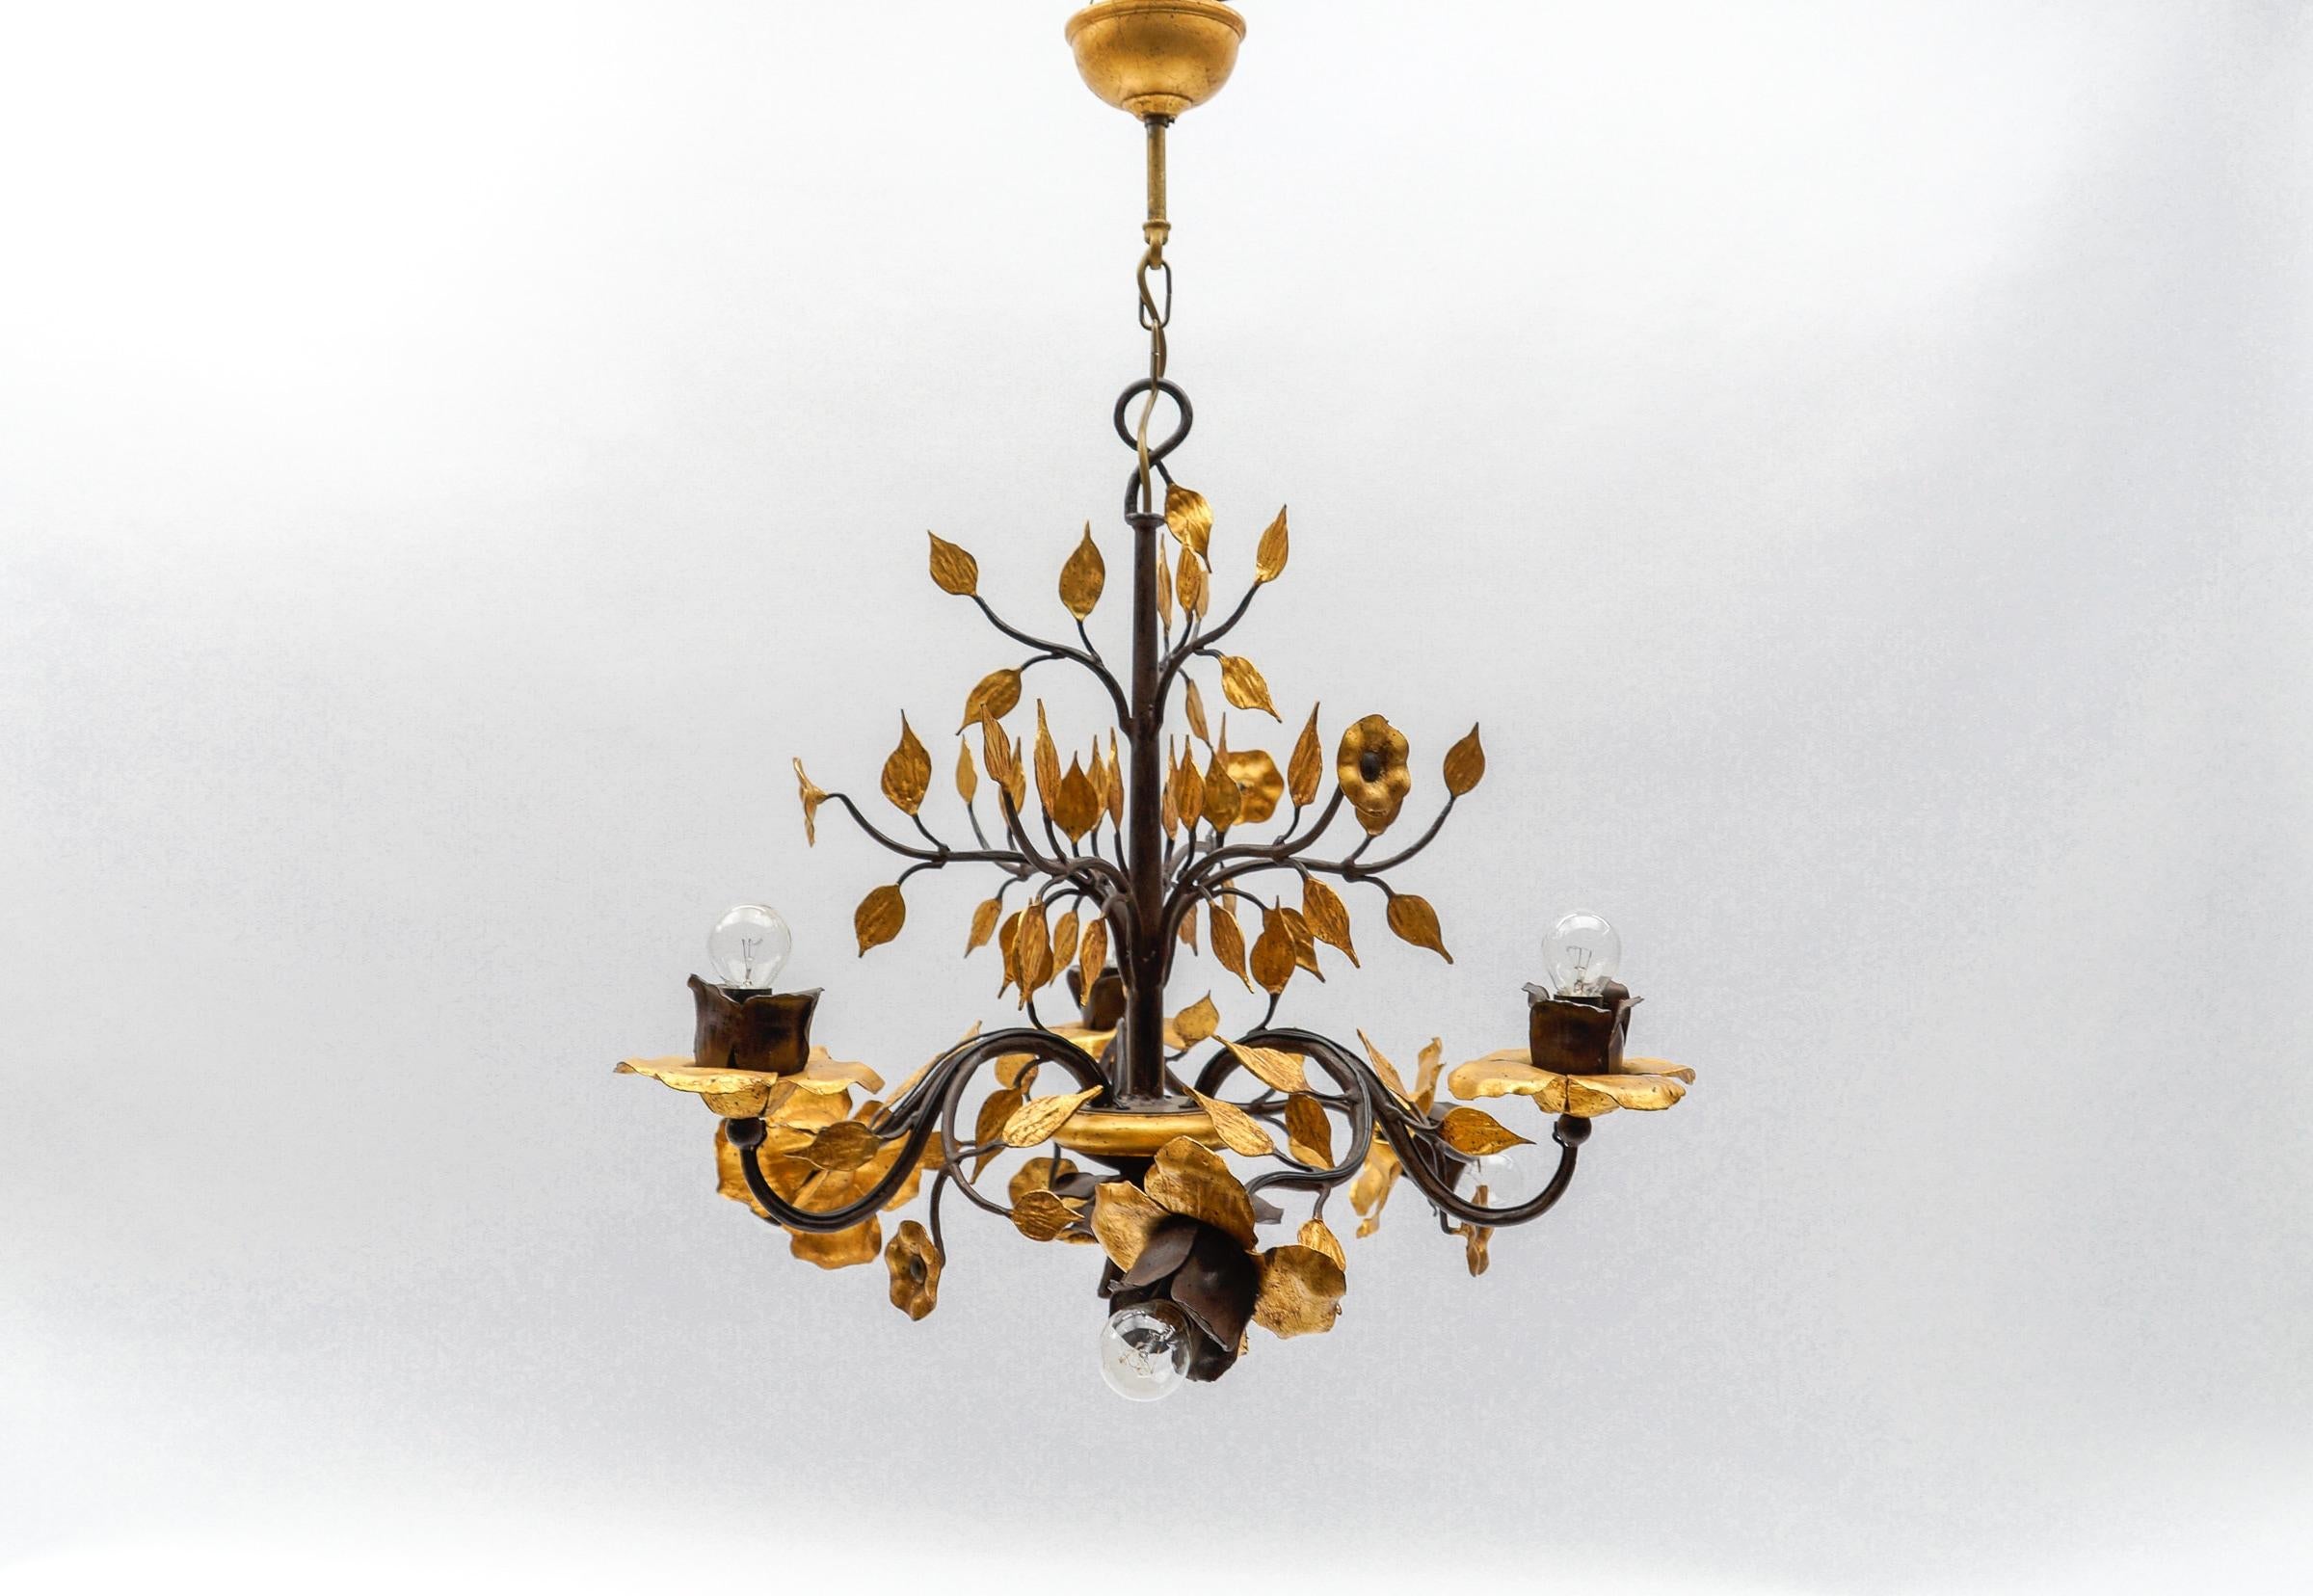 Large Mid-Century Modern Gilded Wrought Iron Ceiling Lamp, 1970s

Fantastic craftsmanship. The leaves are gilded, the branches and leaves are perfectly formed.

Dimensions
Diameter: 24.80 in. (63 cm)
Height: 31.49 in. (80 cm)

Six E14 sockets. Works